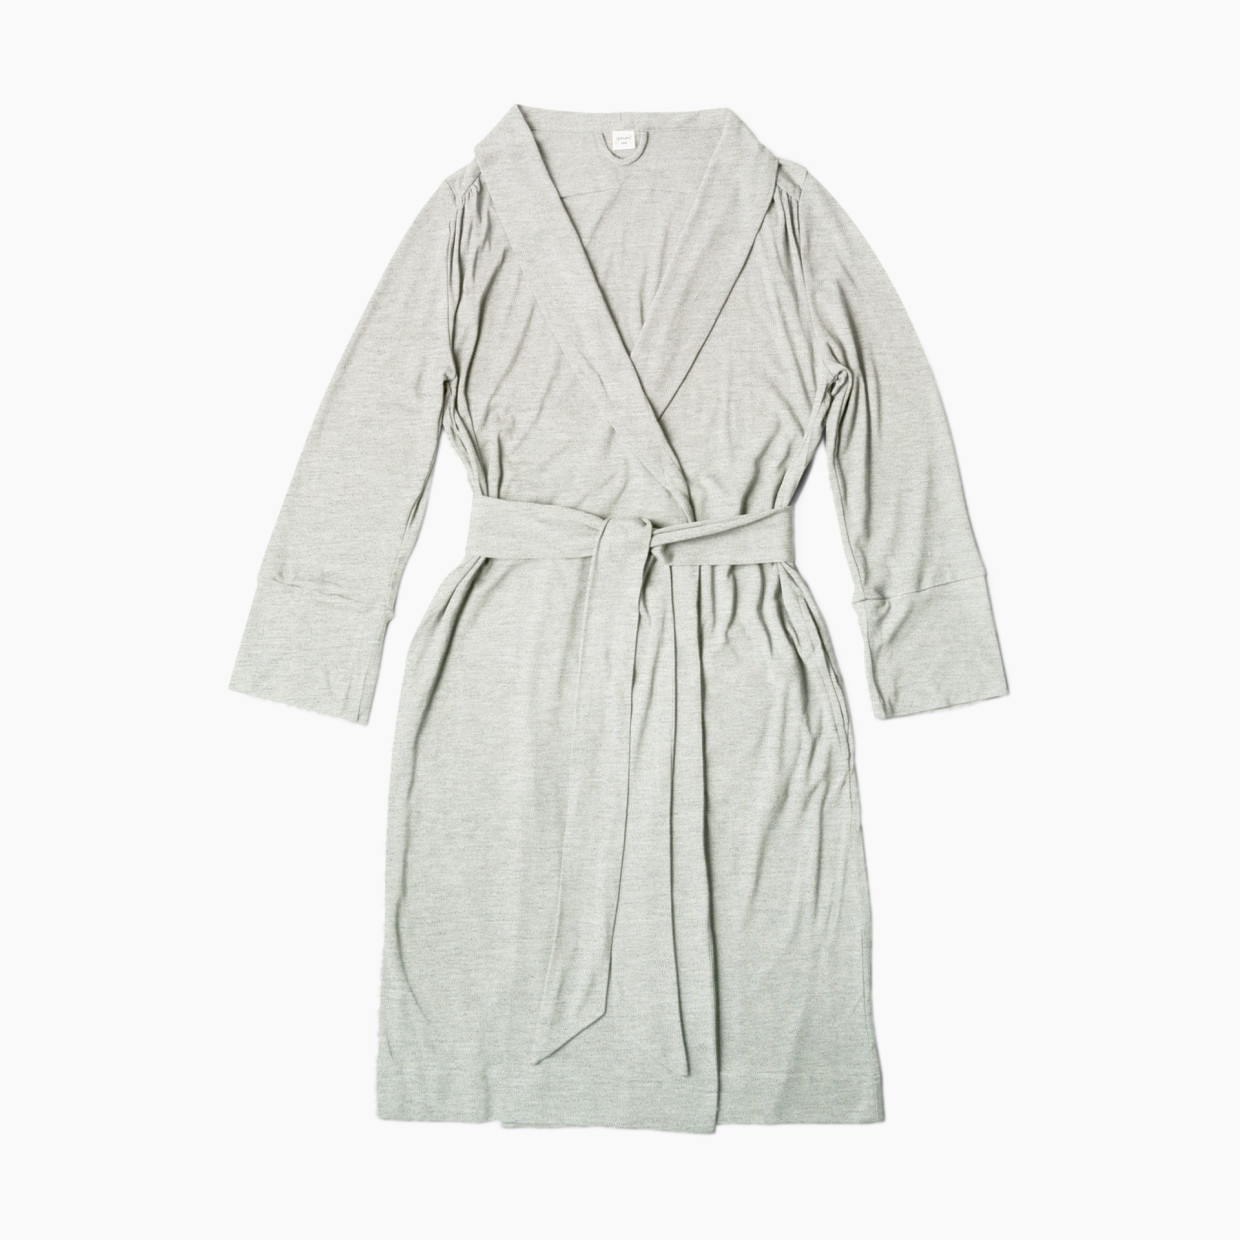 Goumi Kids You'll Live In Mom Robe - Storm Gray, X-Small/Small.